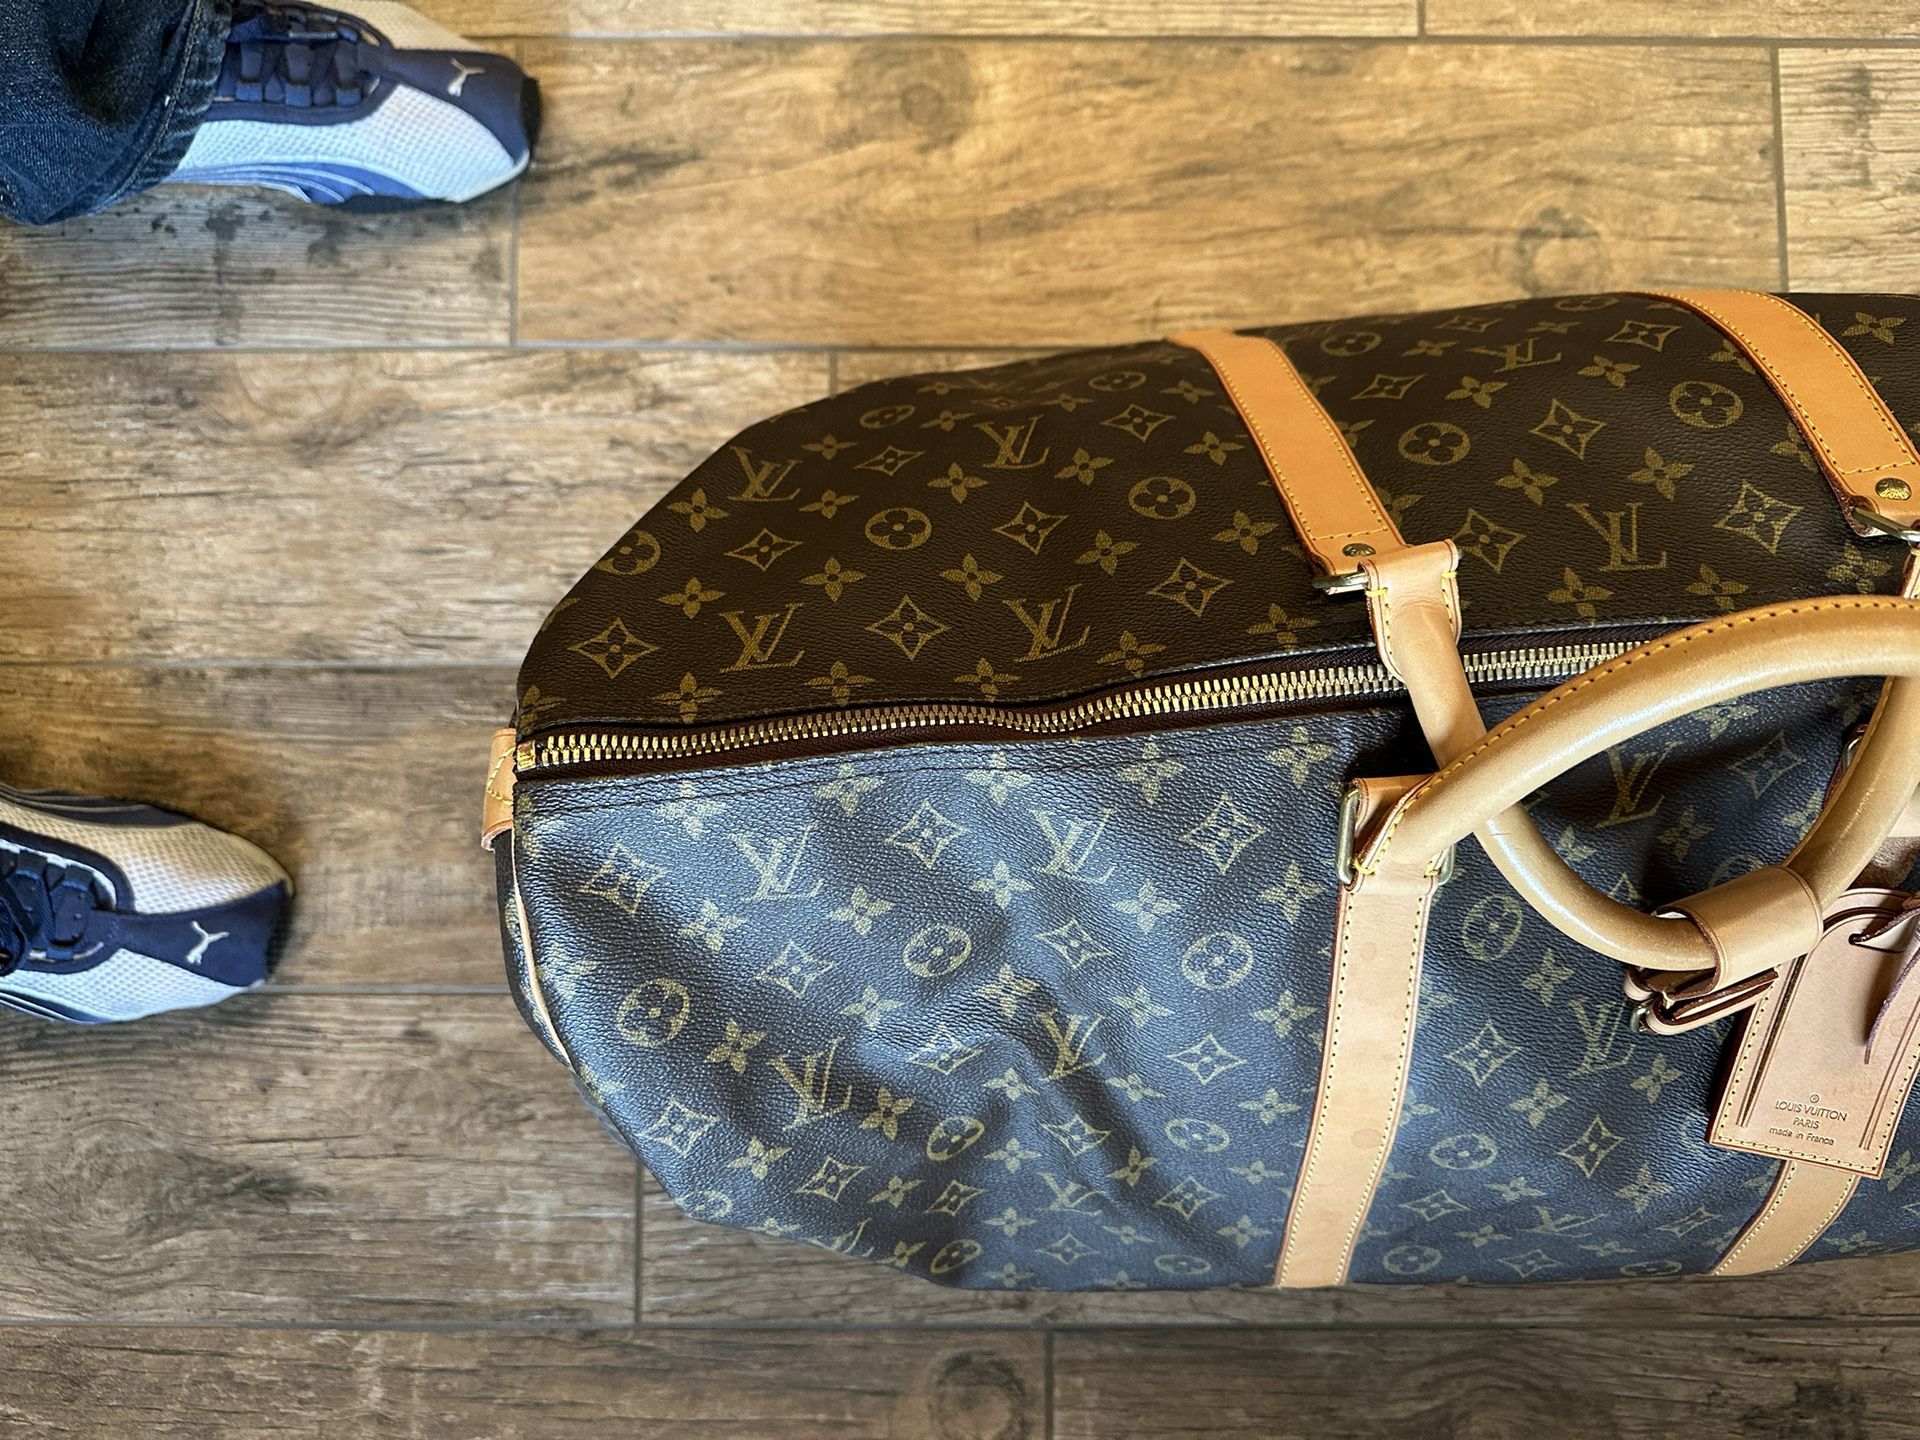 Anniv Coupon Below] 218LOUISVUITTON Fashion MenS And WomenS  Travel Bags Duffel Bag Designers Luggage Bag Large Capacity Sports Bag From  Tonlines, $37.19